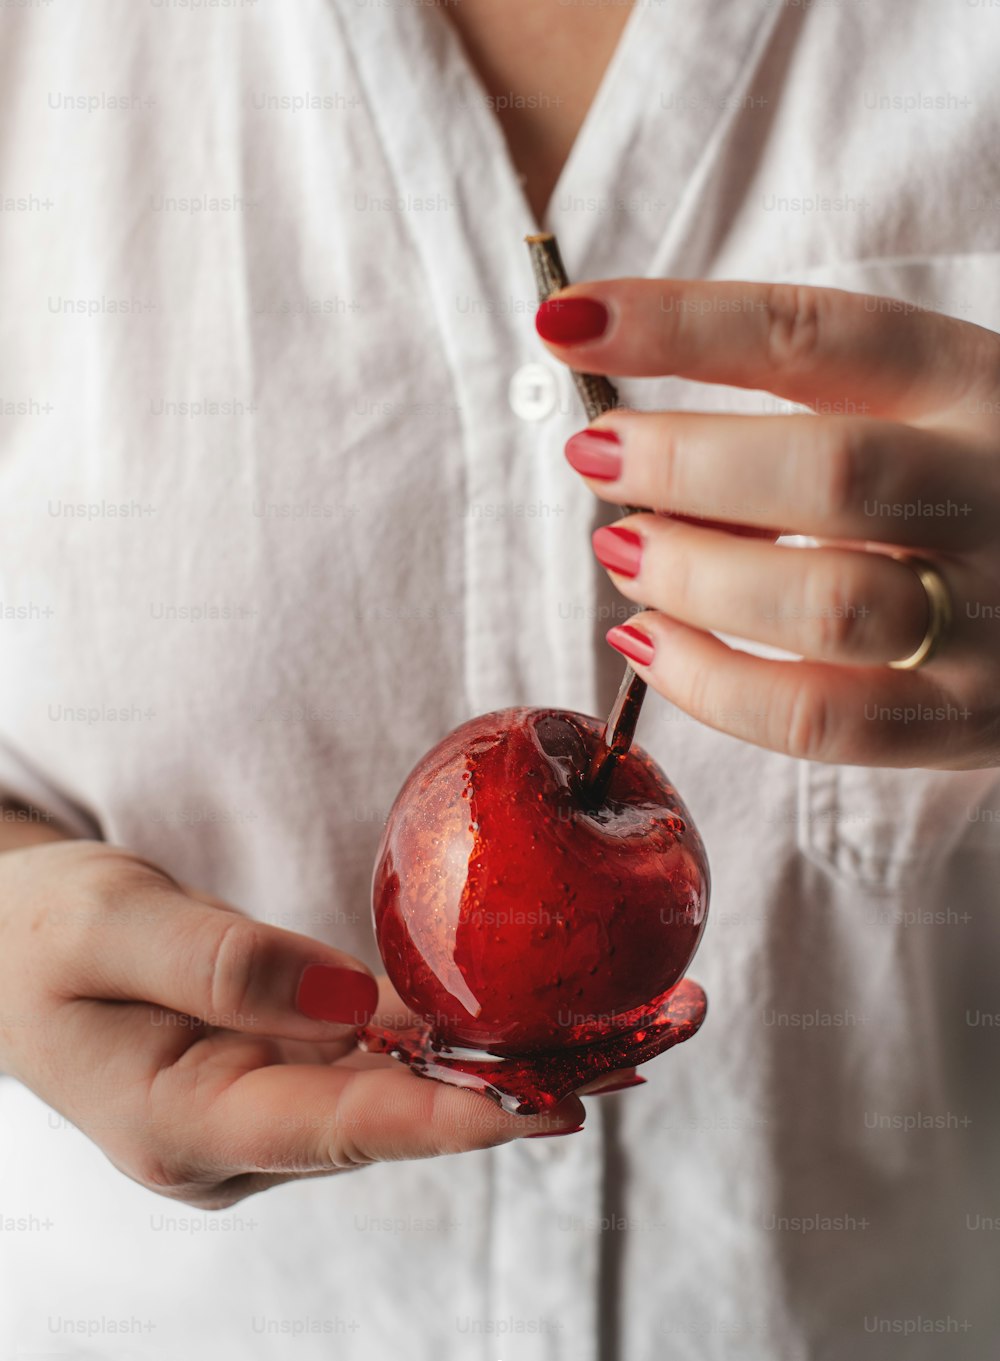 a woman holding an apple with a bite taken out of it